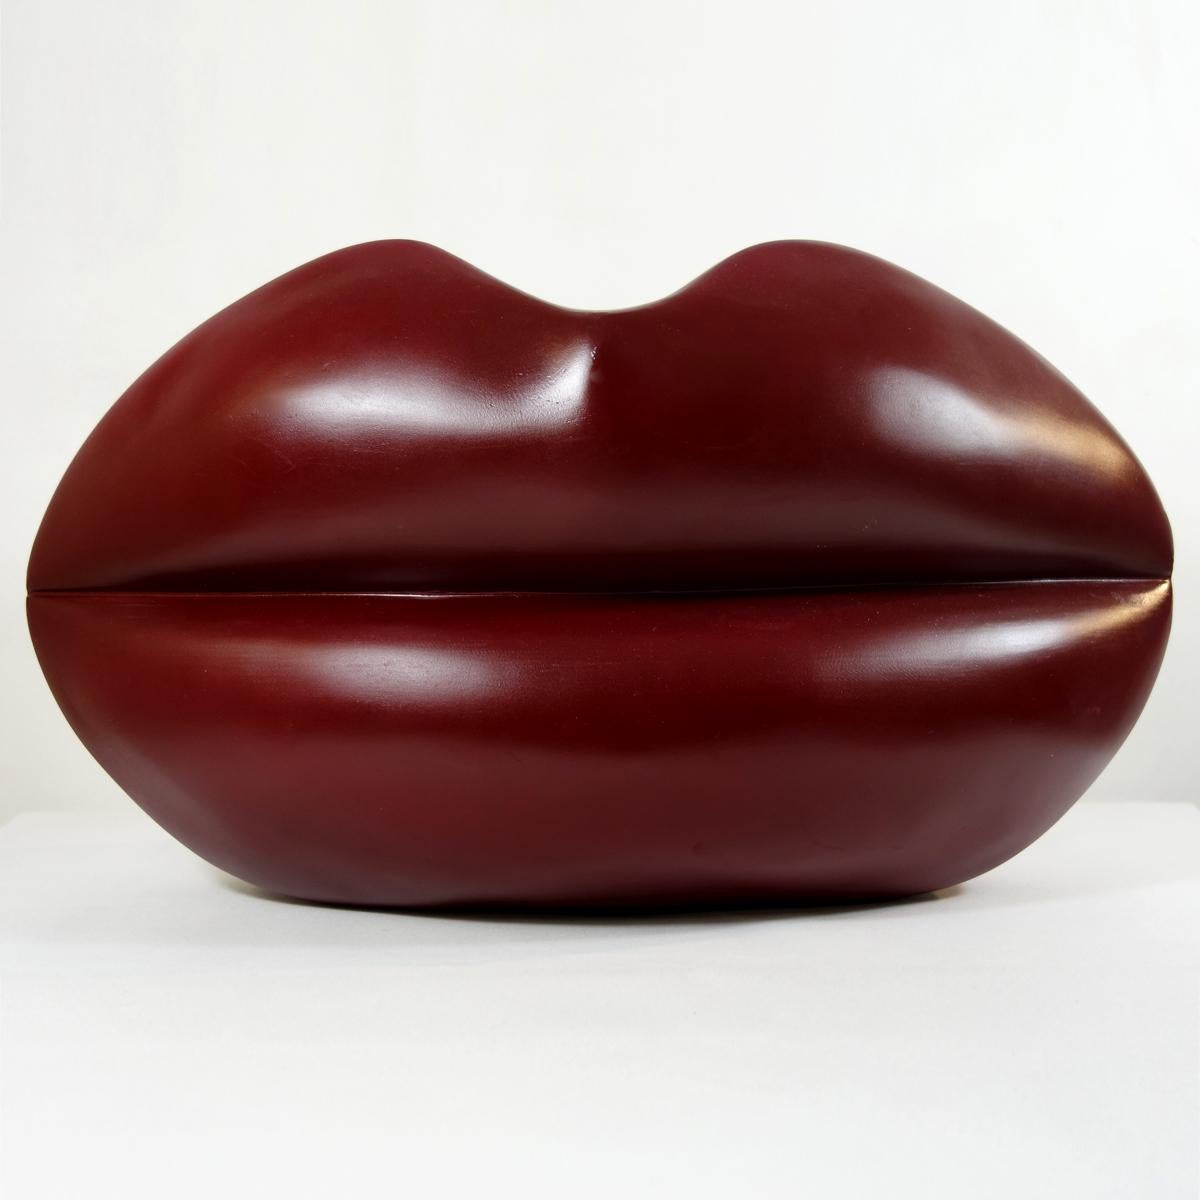 This huge mouth made of fiberglass in a deep red color clearly comes from the era of pop art, a movement that emerged in the United Kingdom and United States in the late 1950s. A high fun factor was one of the main characteristics of the period.